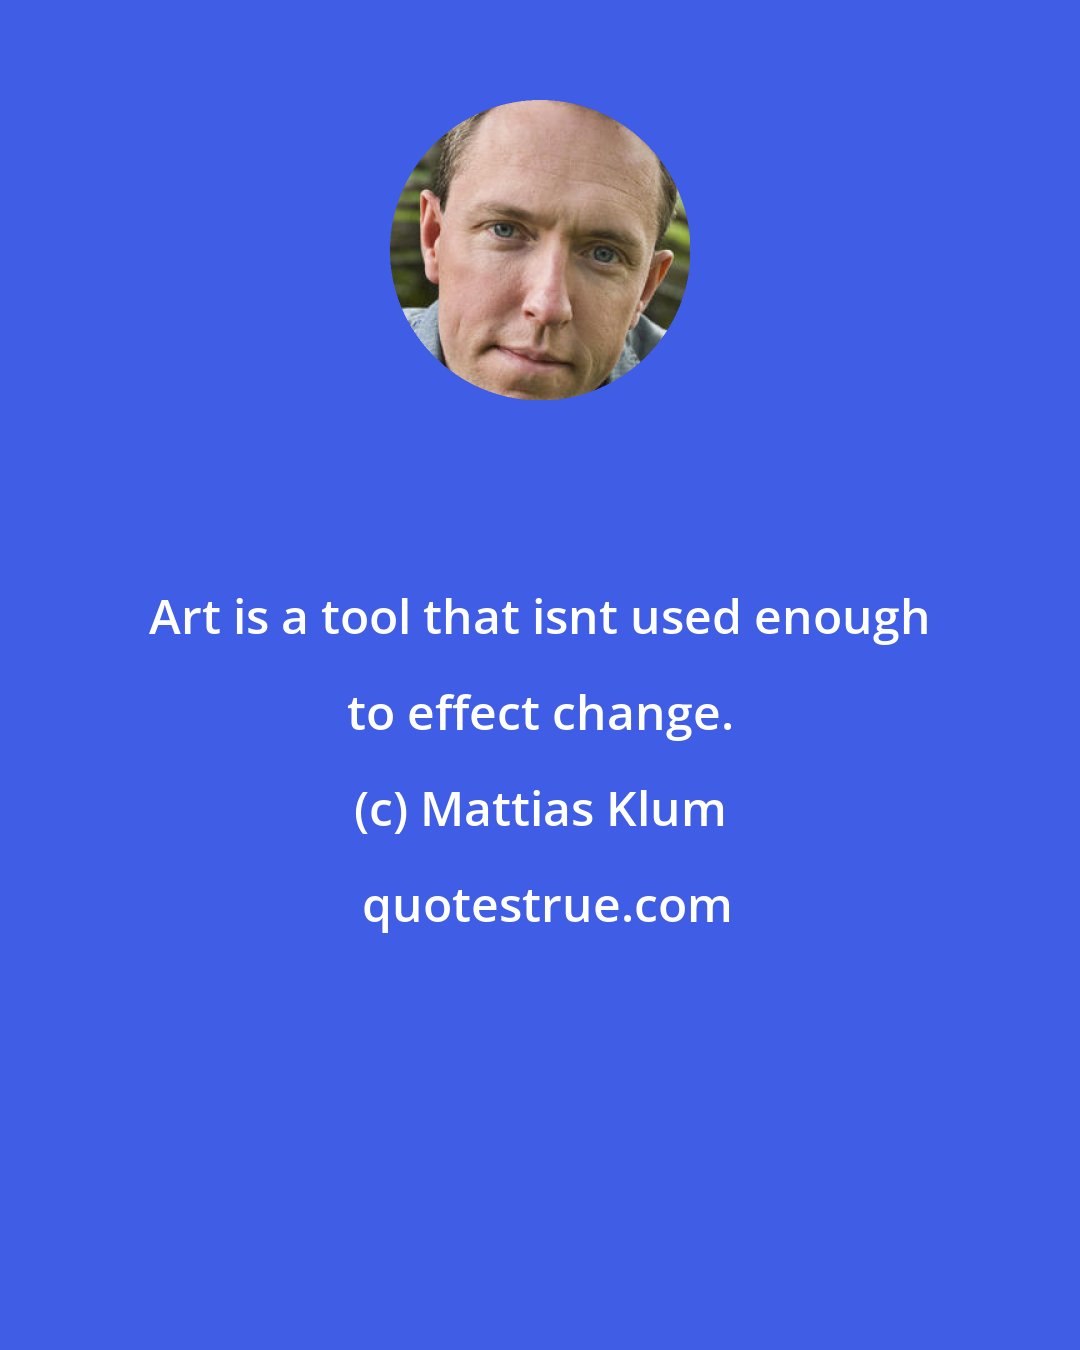 Mattias Klum: Art is a tool that isnt used enough to effect change.